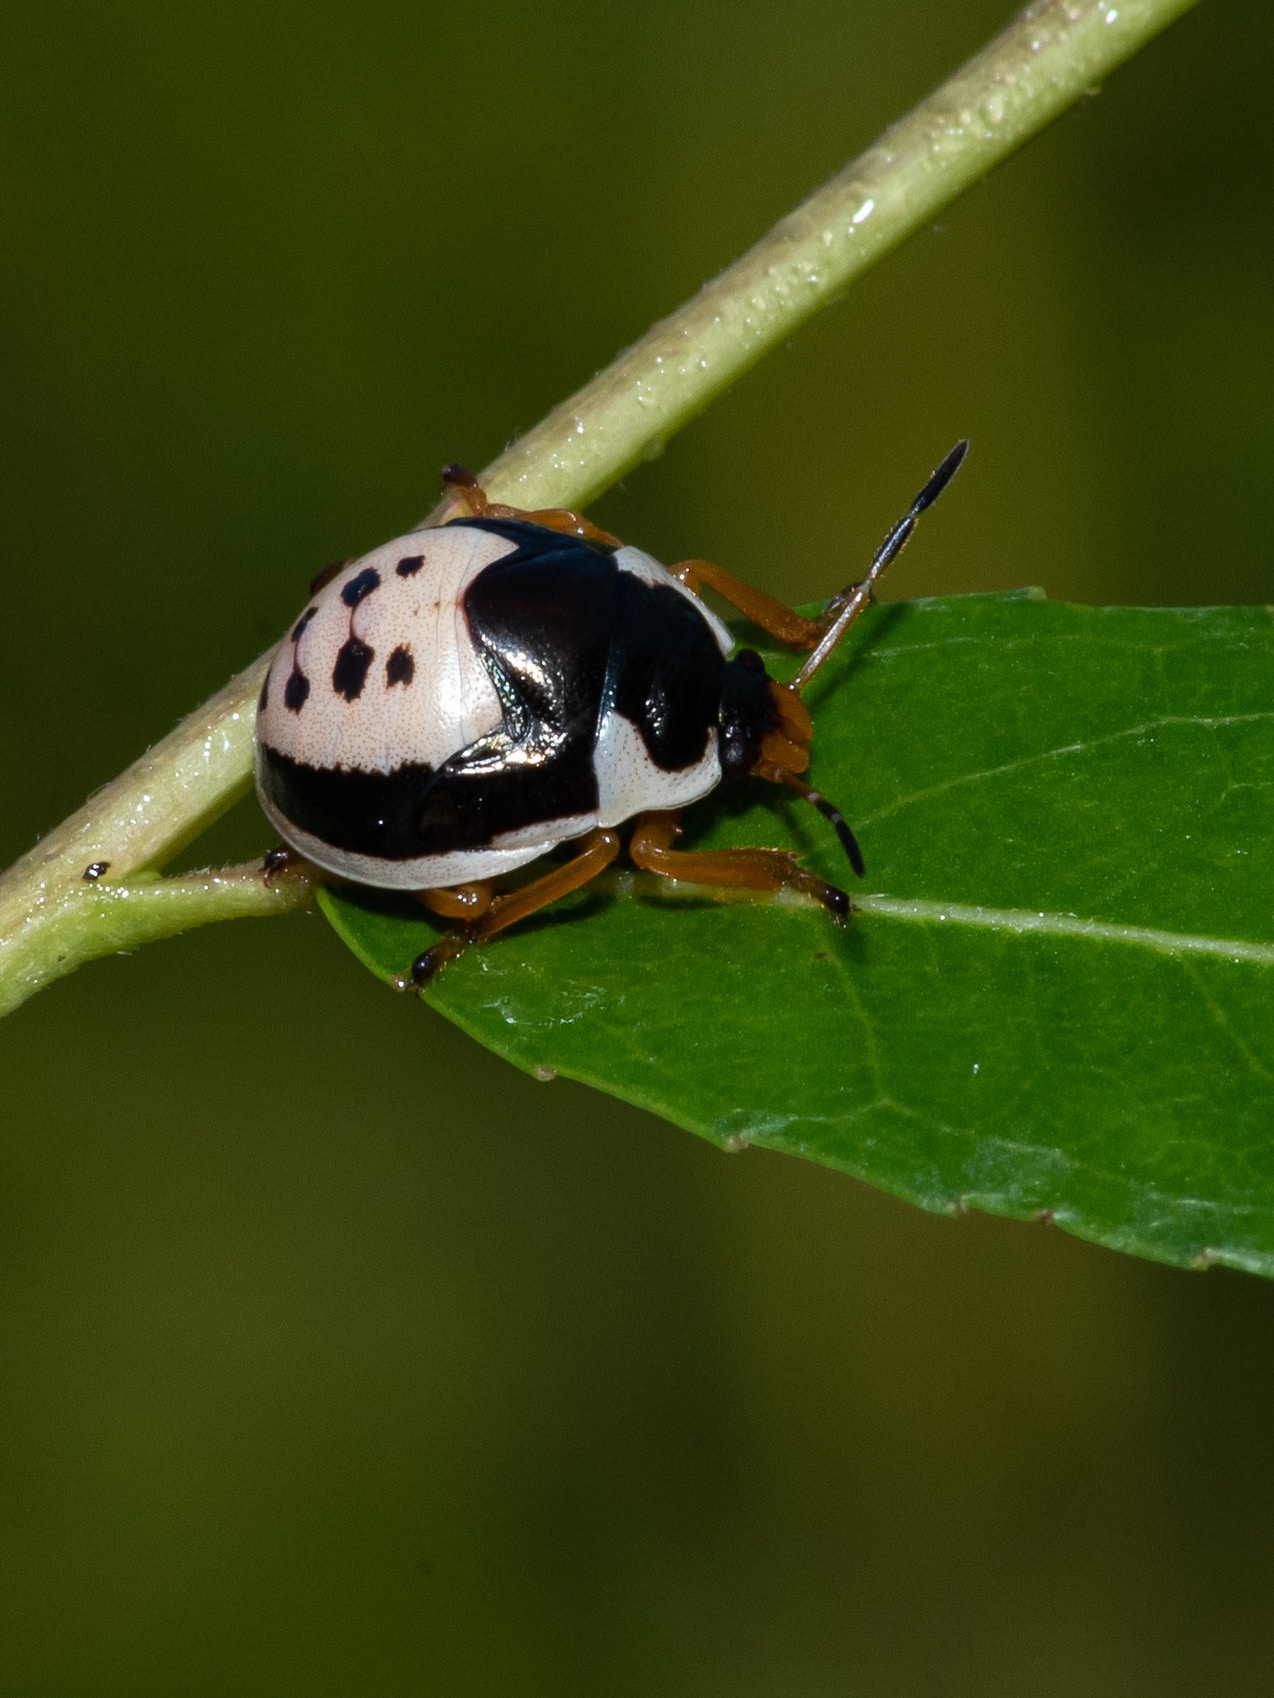 vertical photo of an Anchor Stink Bug, black and white color, on a green leaf